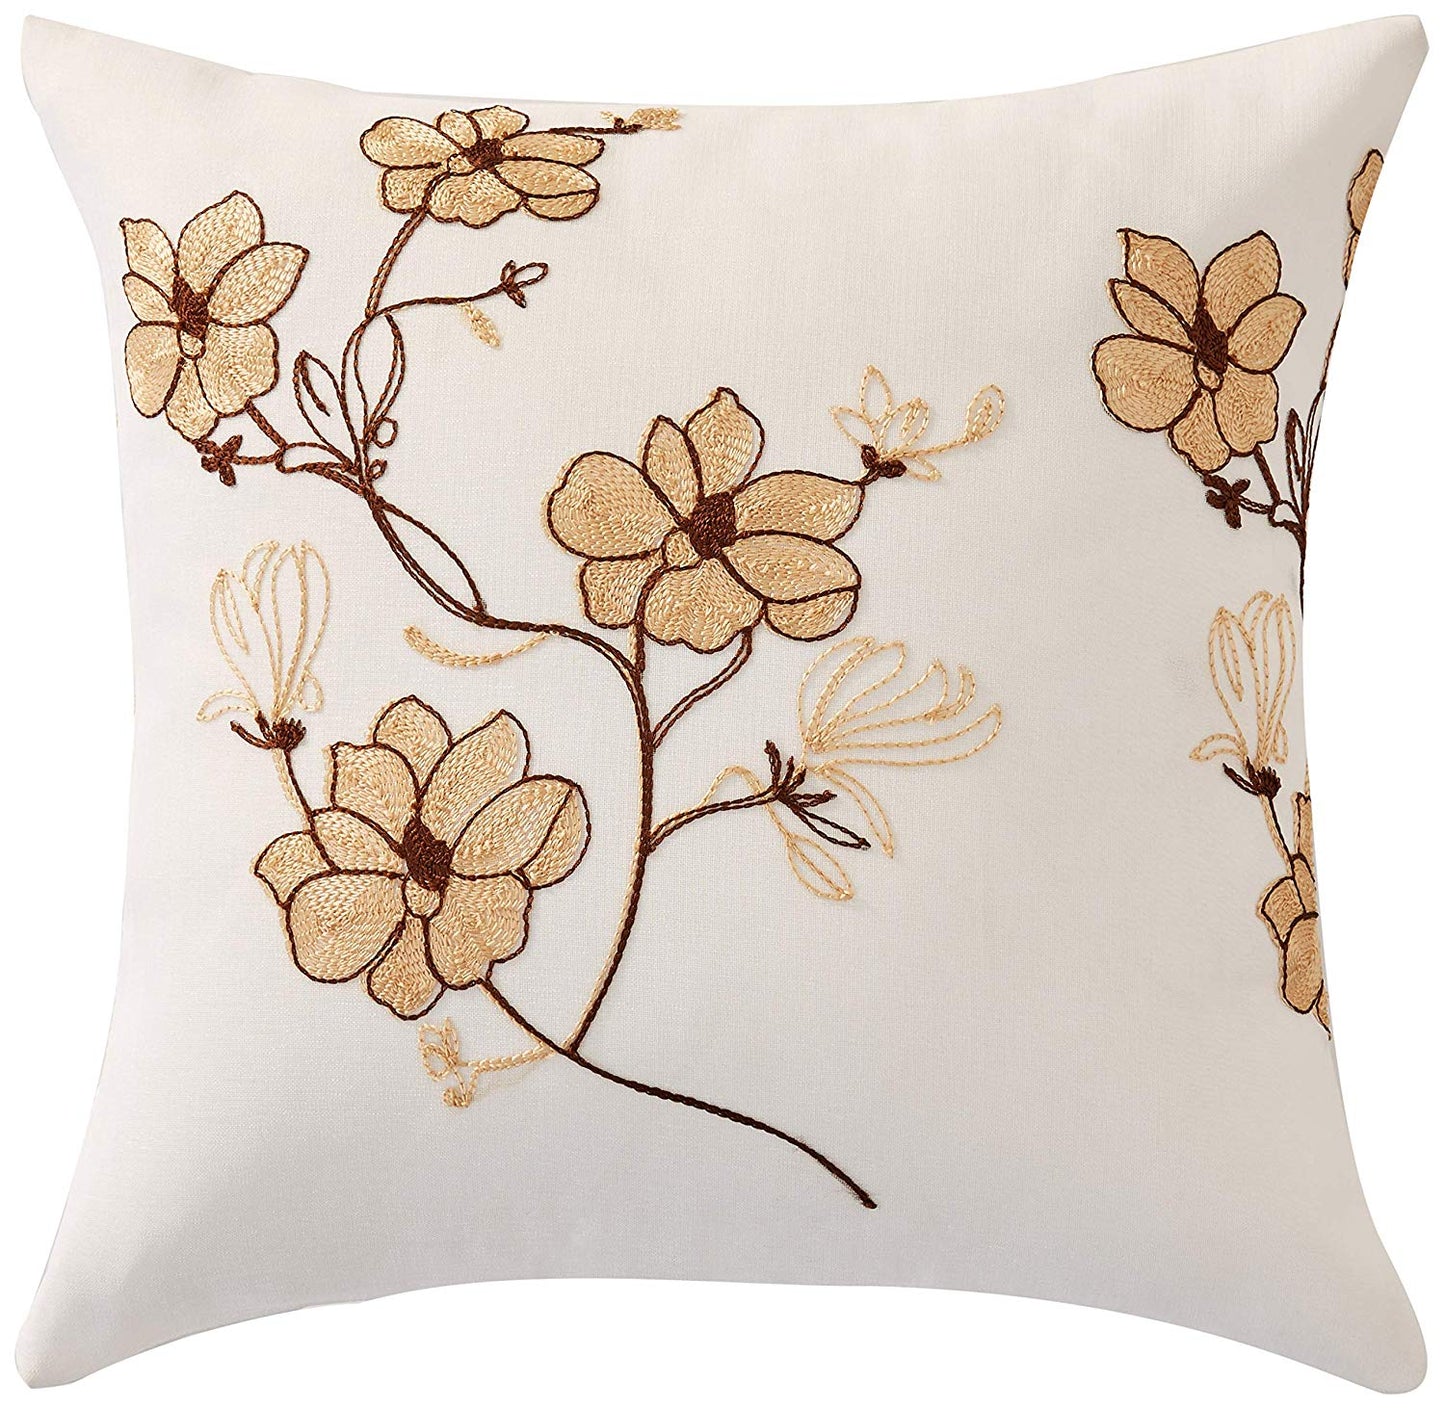 Marvelous Organza Embroidered Floral Design Decorative Accent Throw Pillow